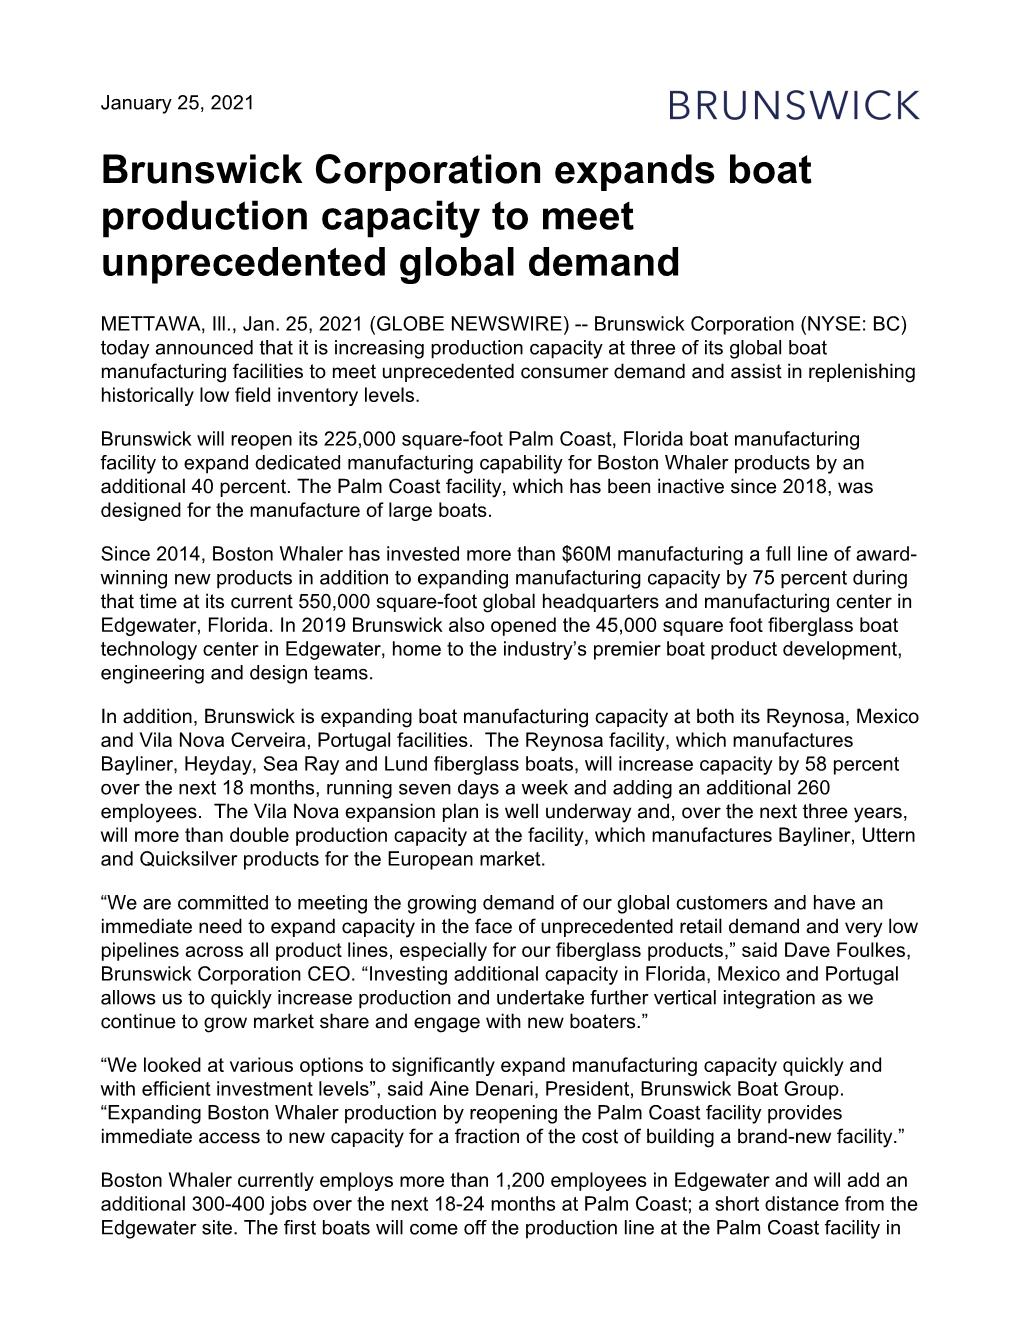 Brunswick Corporation Expands Boat Production Capacity to Meet Unprecedented Global Demand